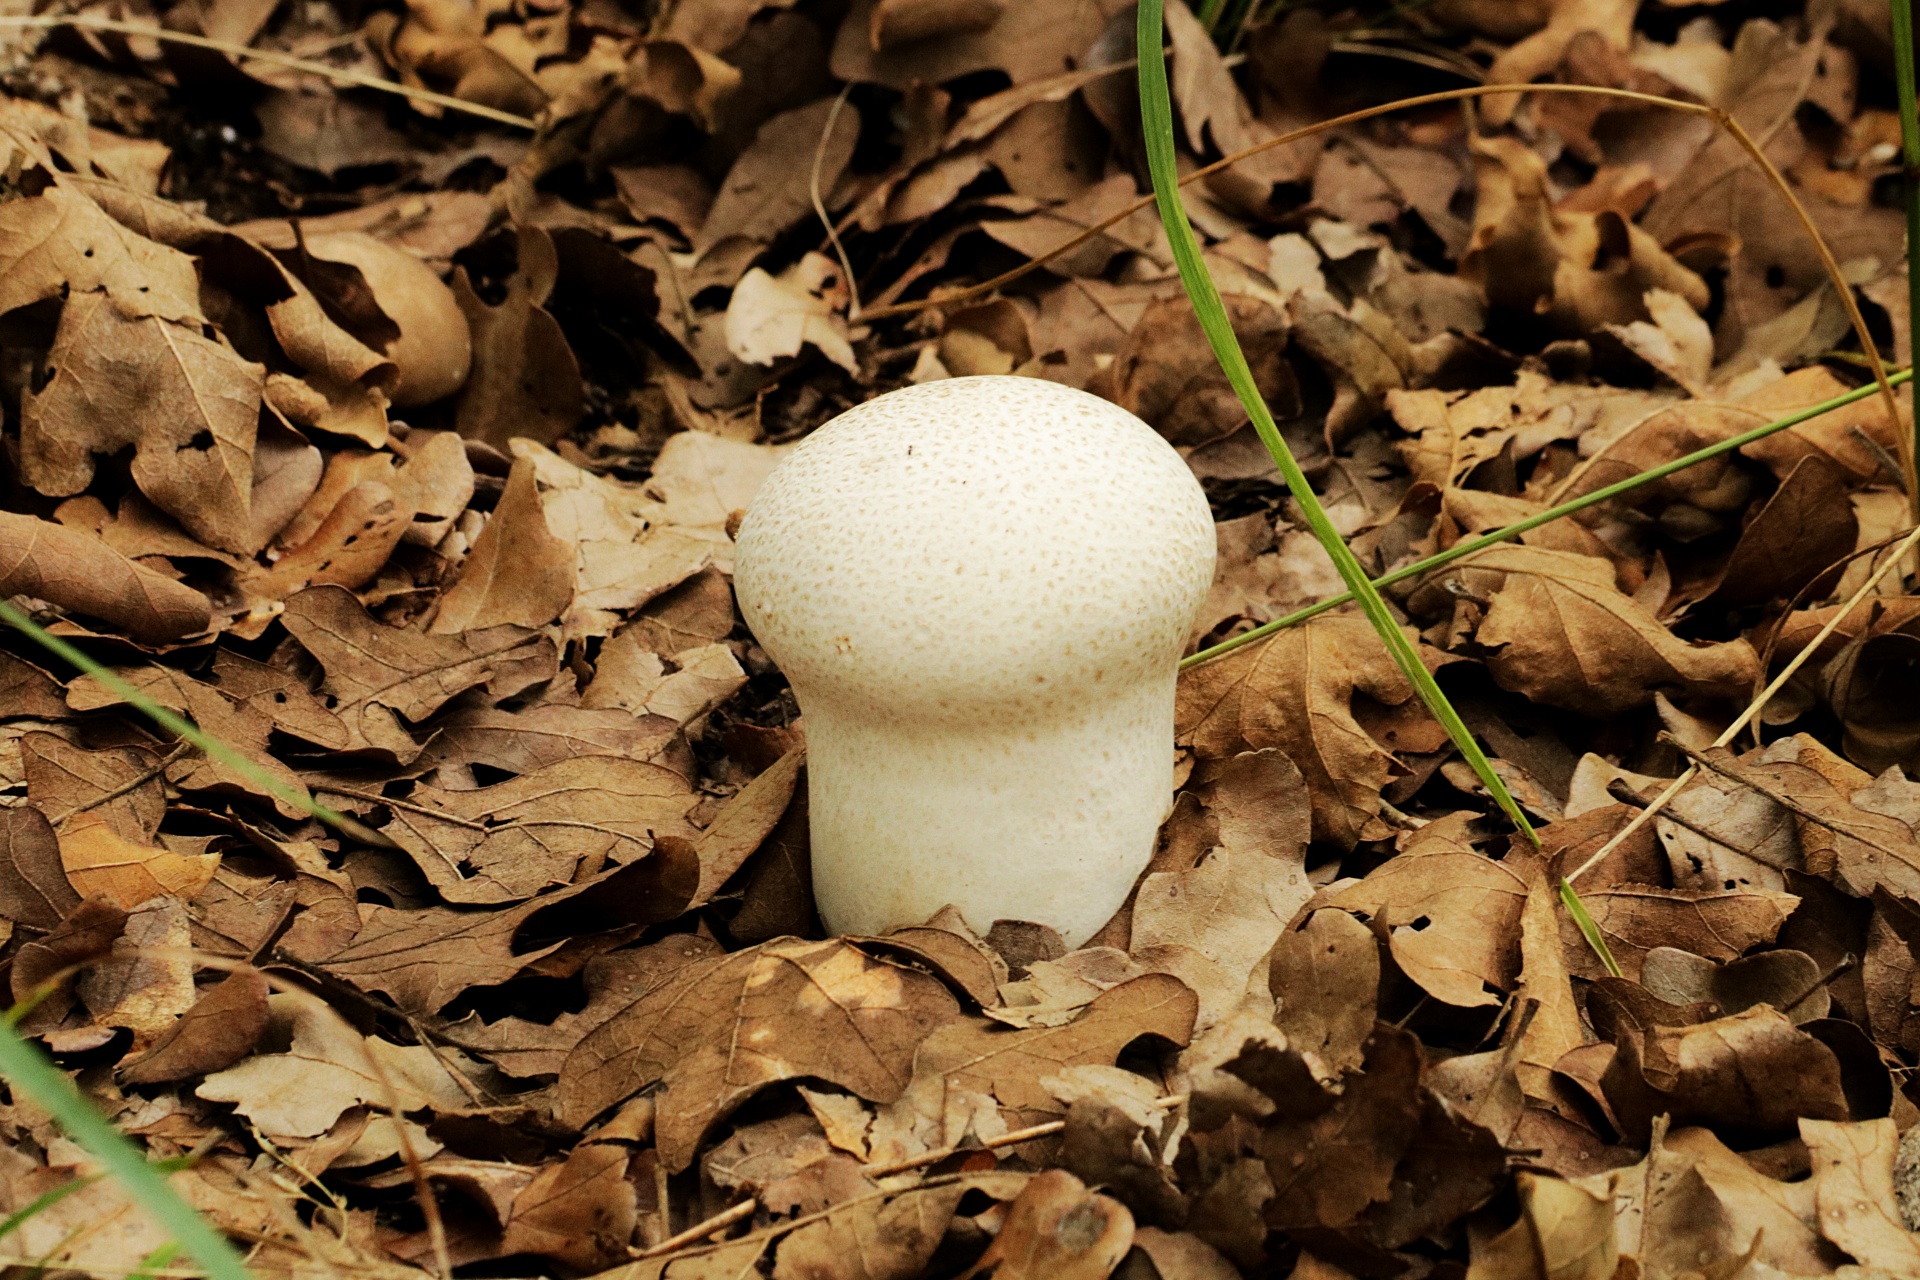 A little white puffball mushroom grows up through the dead brown leaves of the floor of the woods in early fall.